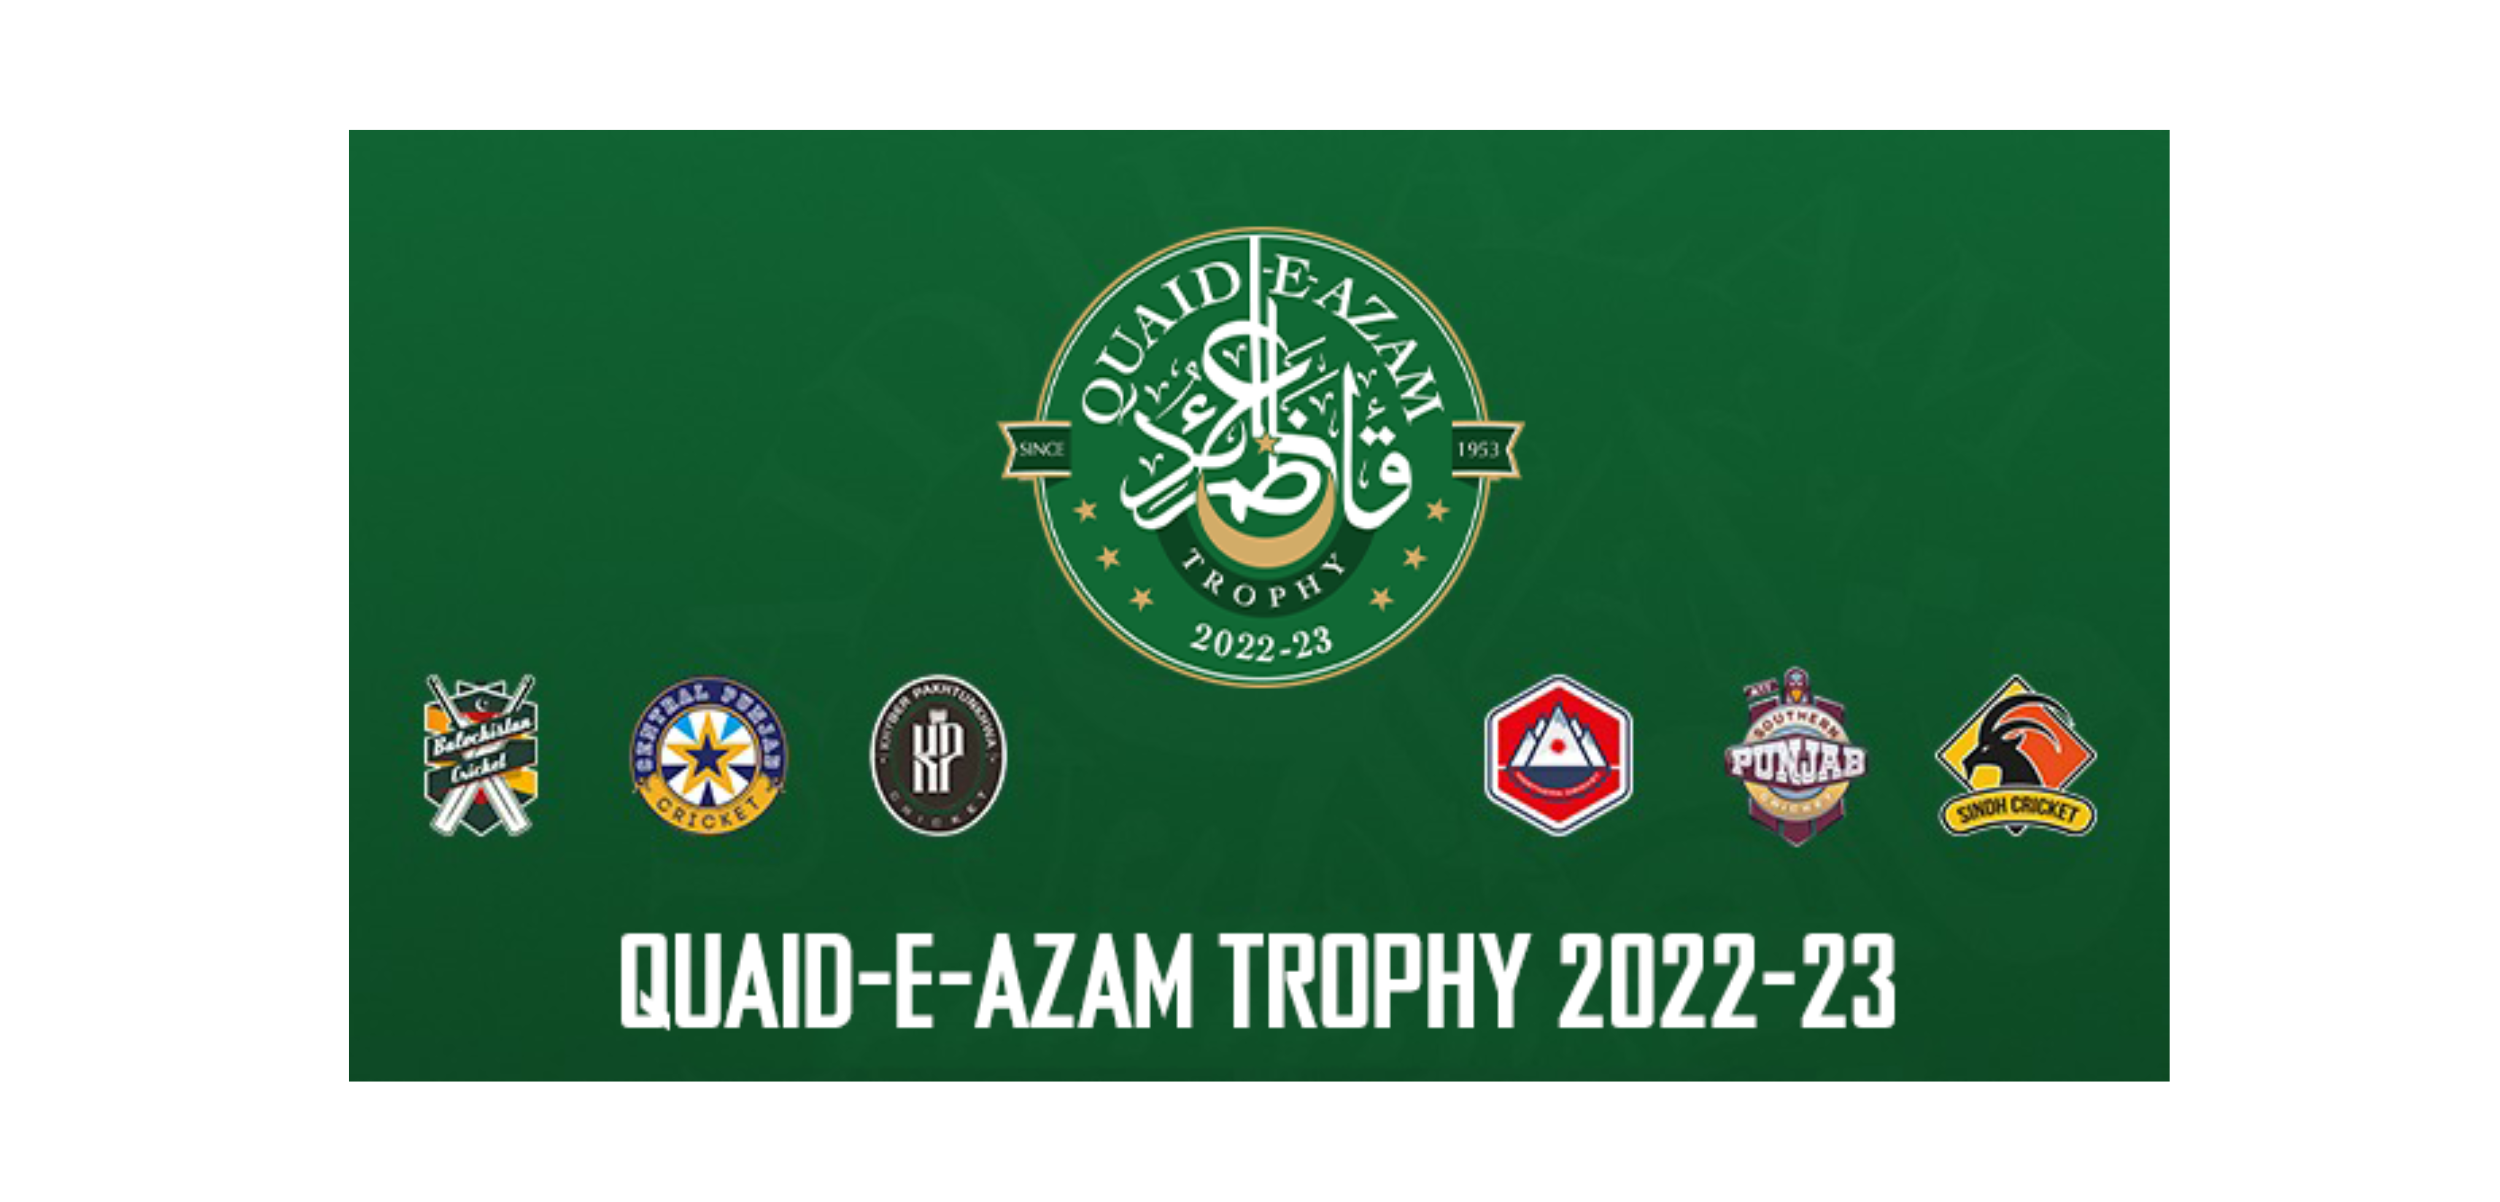 PCB: Northern, Sindh and Central Punjab in the hunt for Quaid-e-Azam Trophy 2022-23 final spots